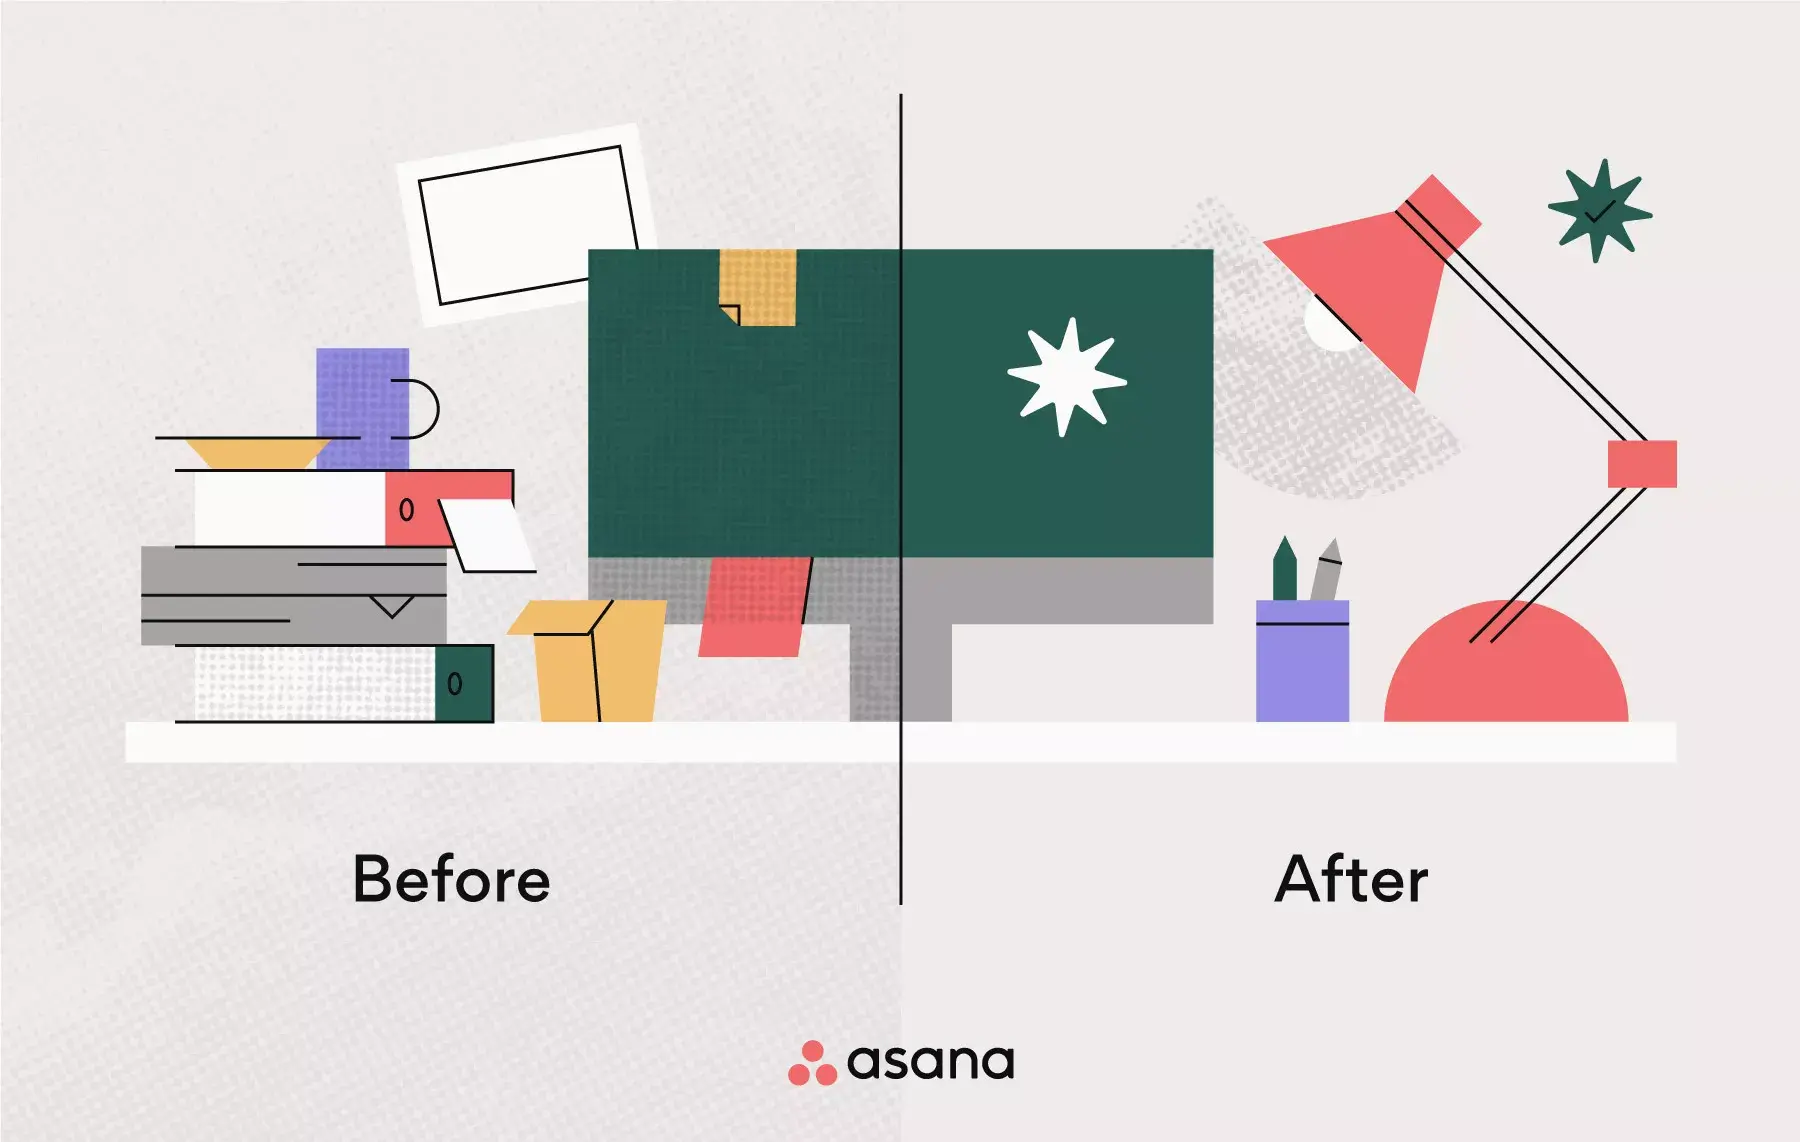 [inline illustration] before and after work desk organization (abstract)